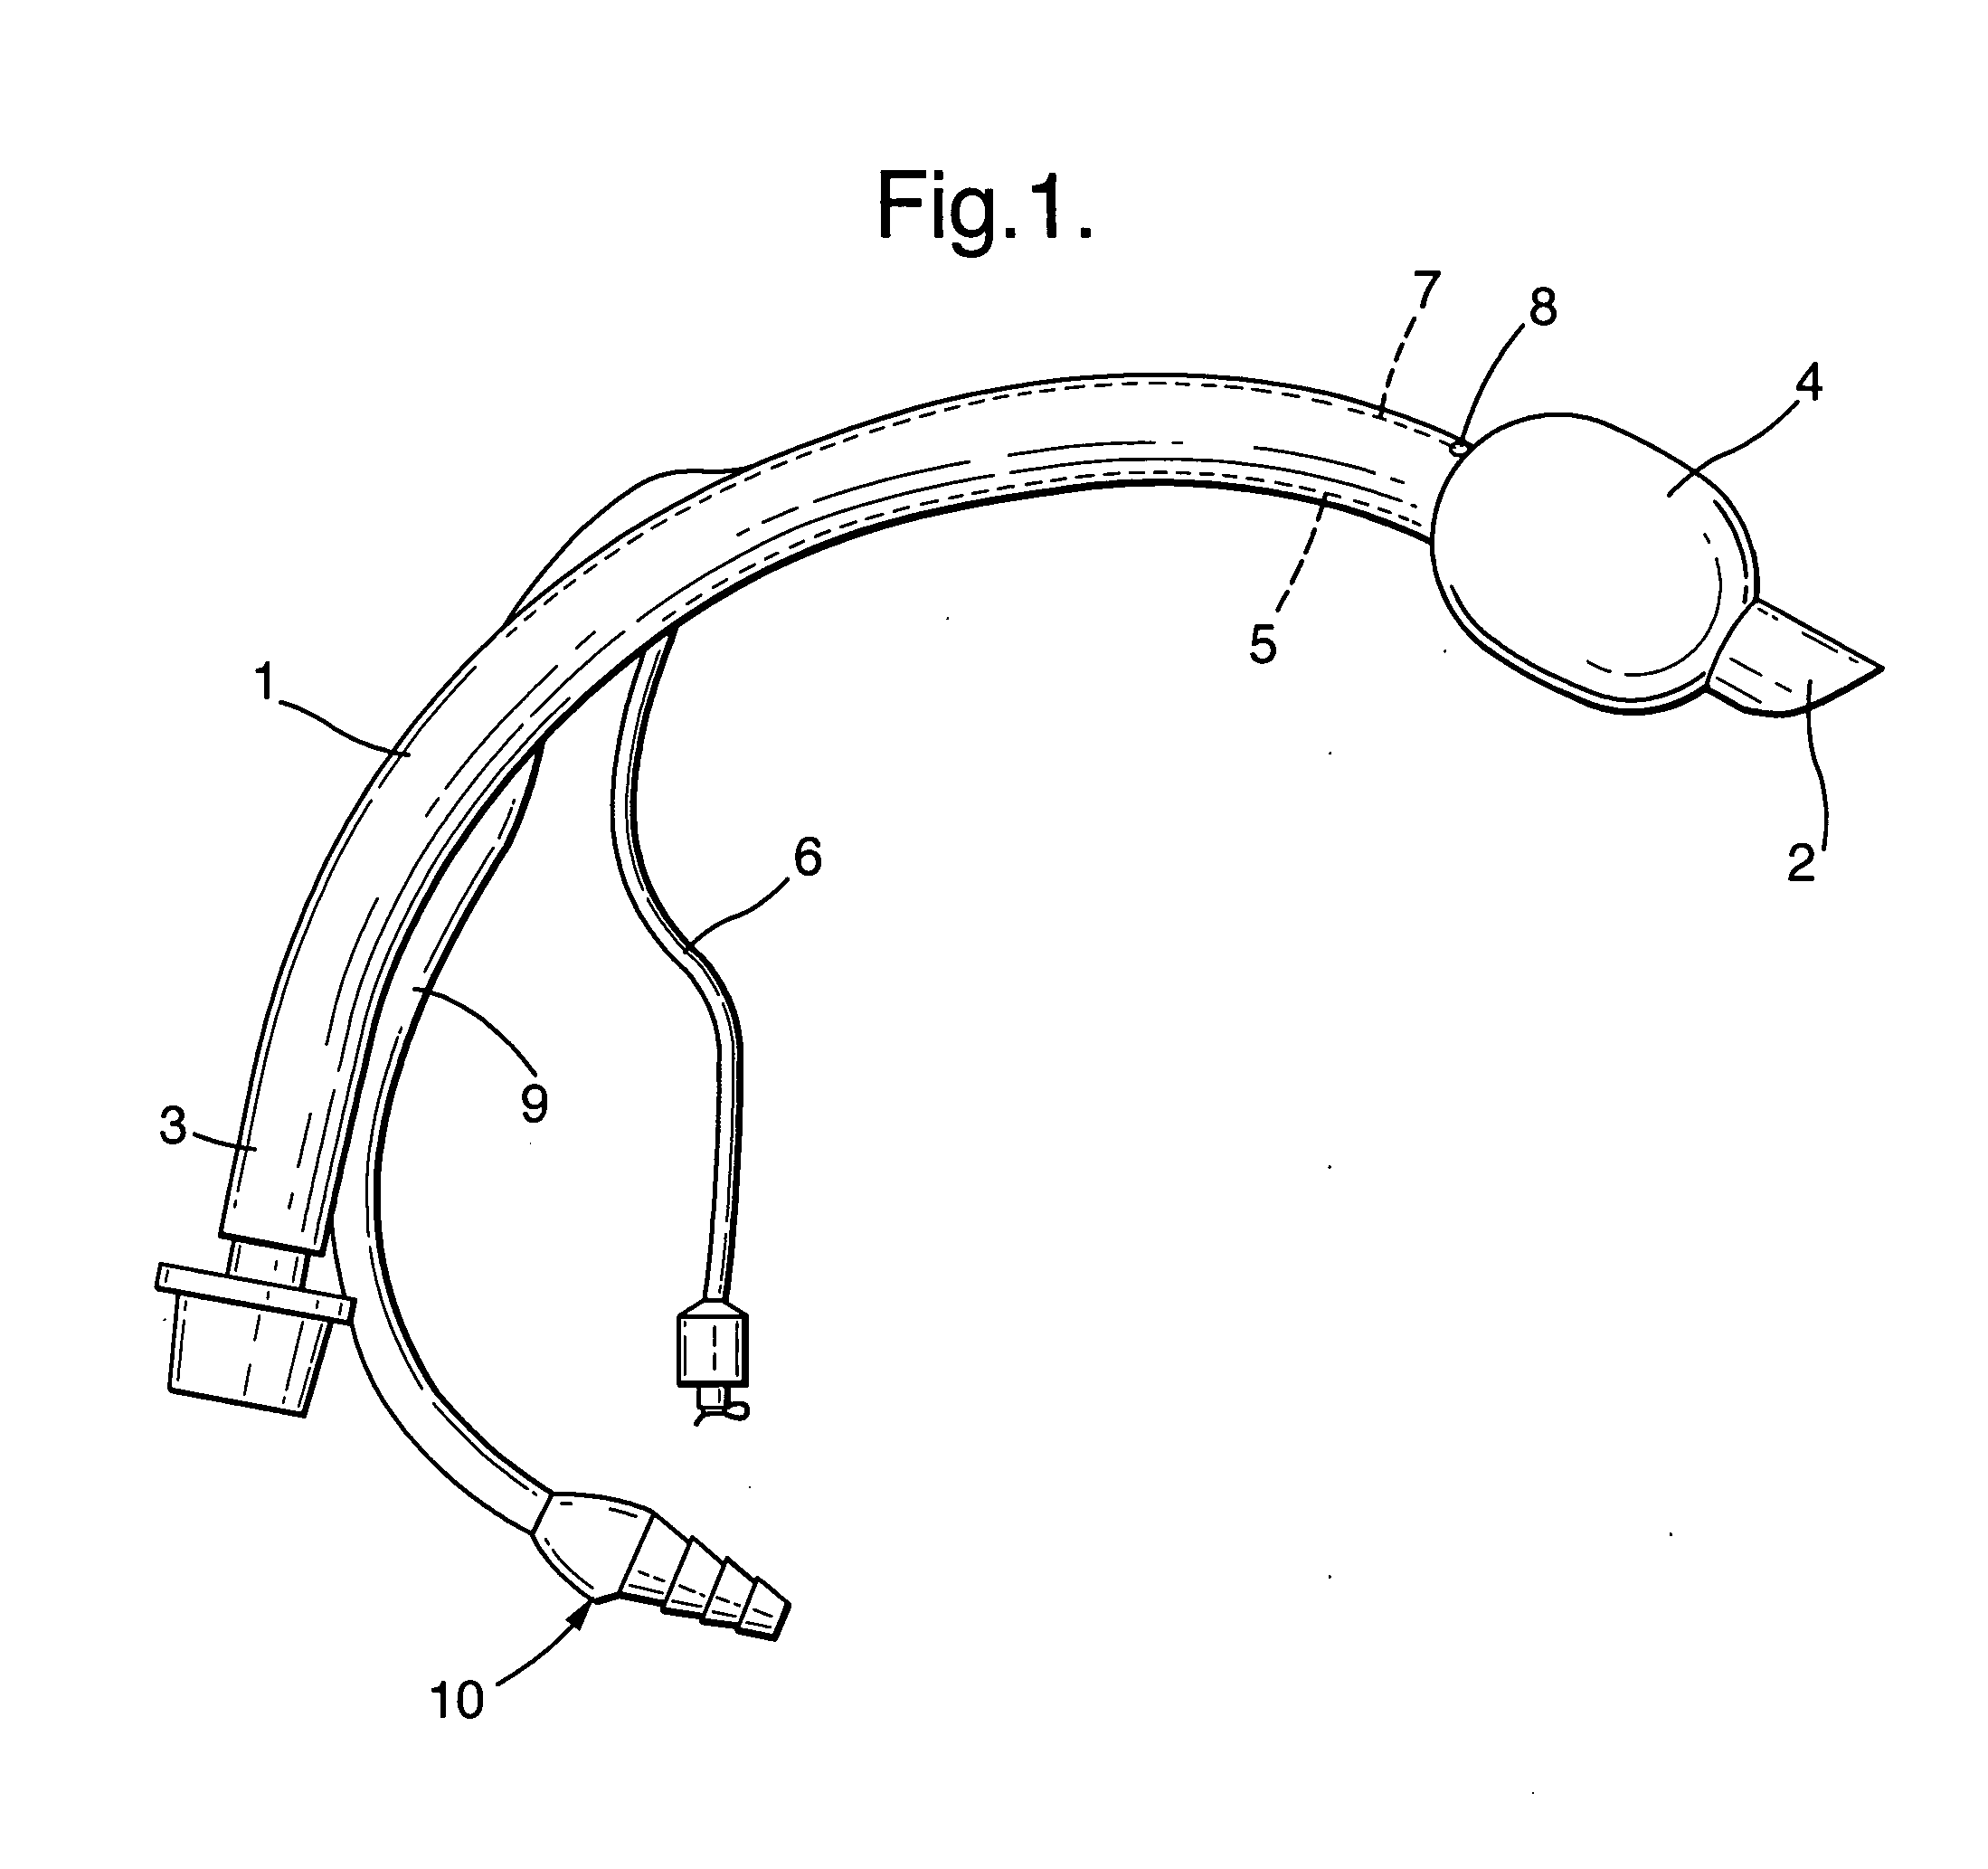 Suction apparatus and connectors